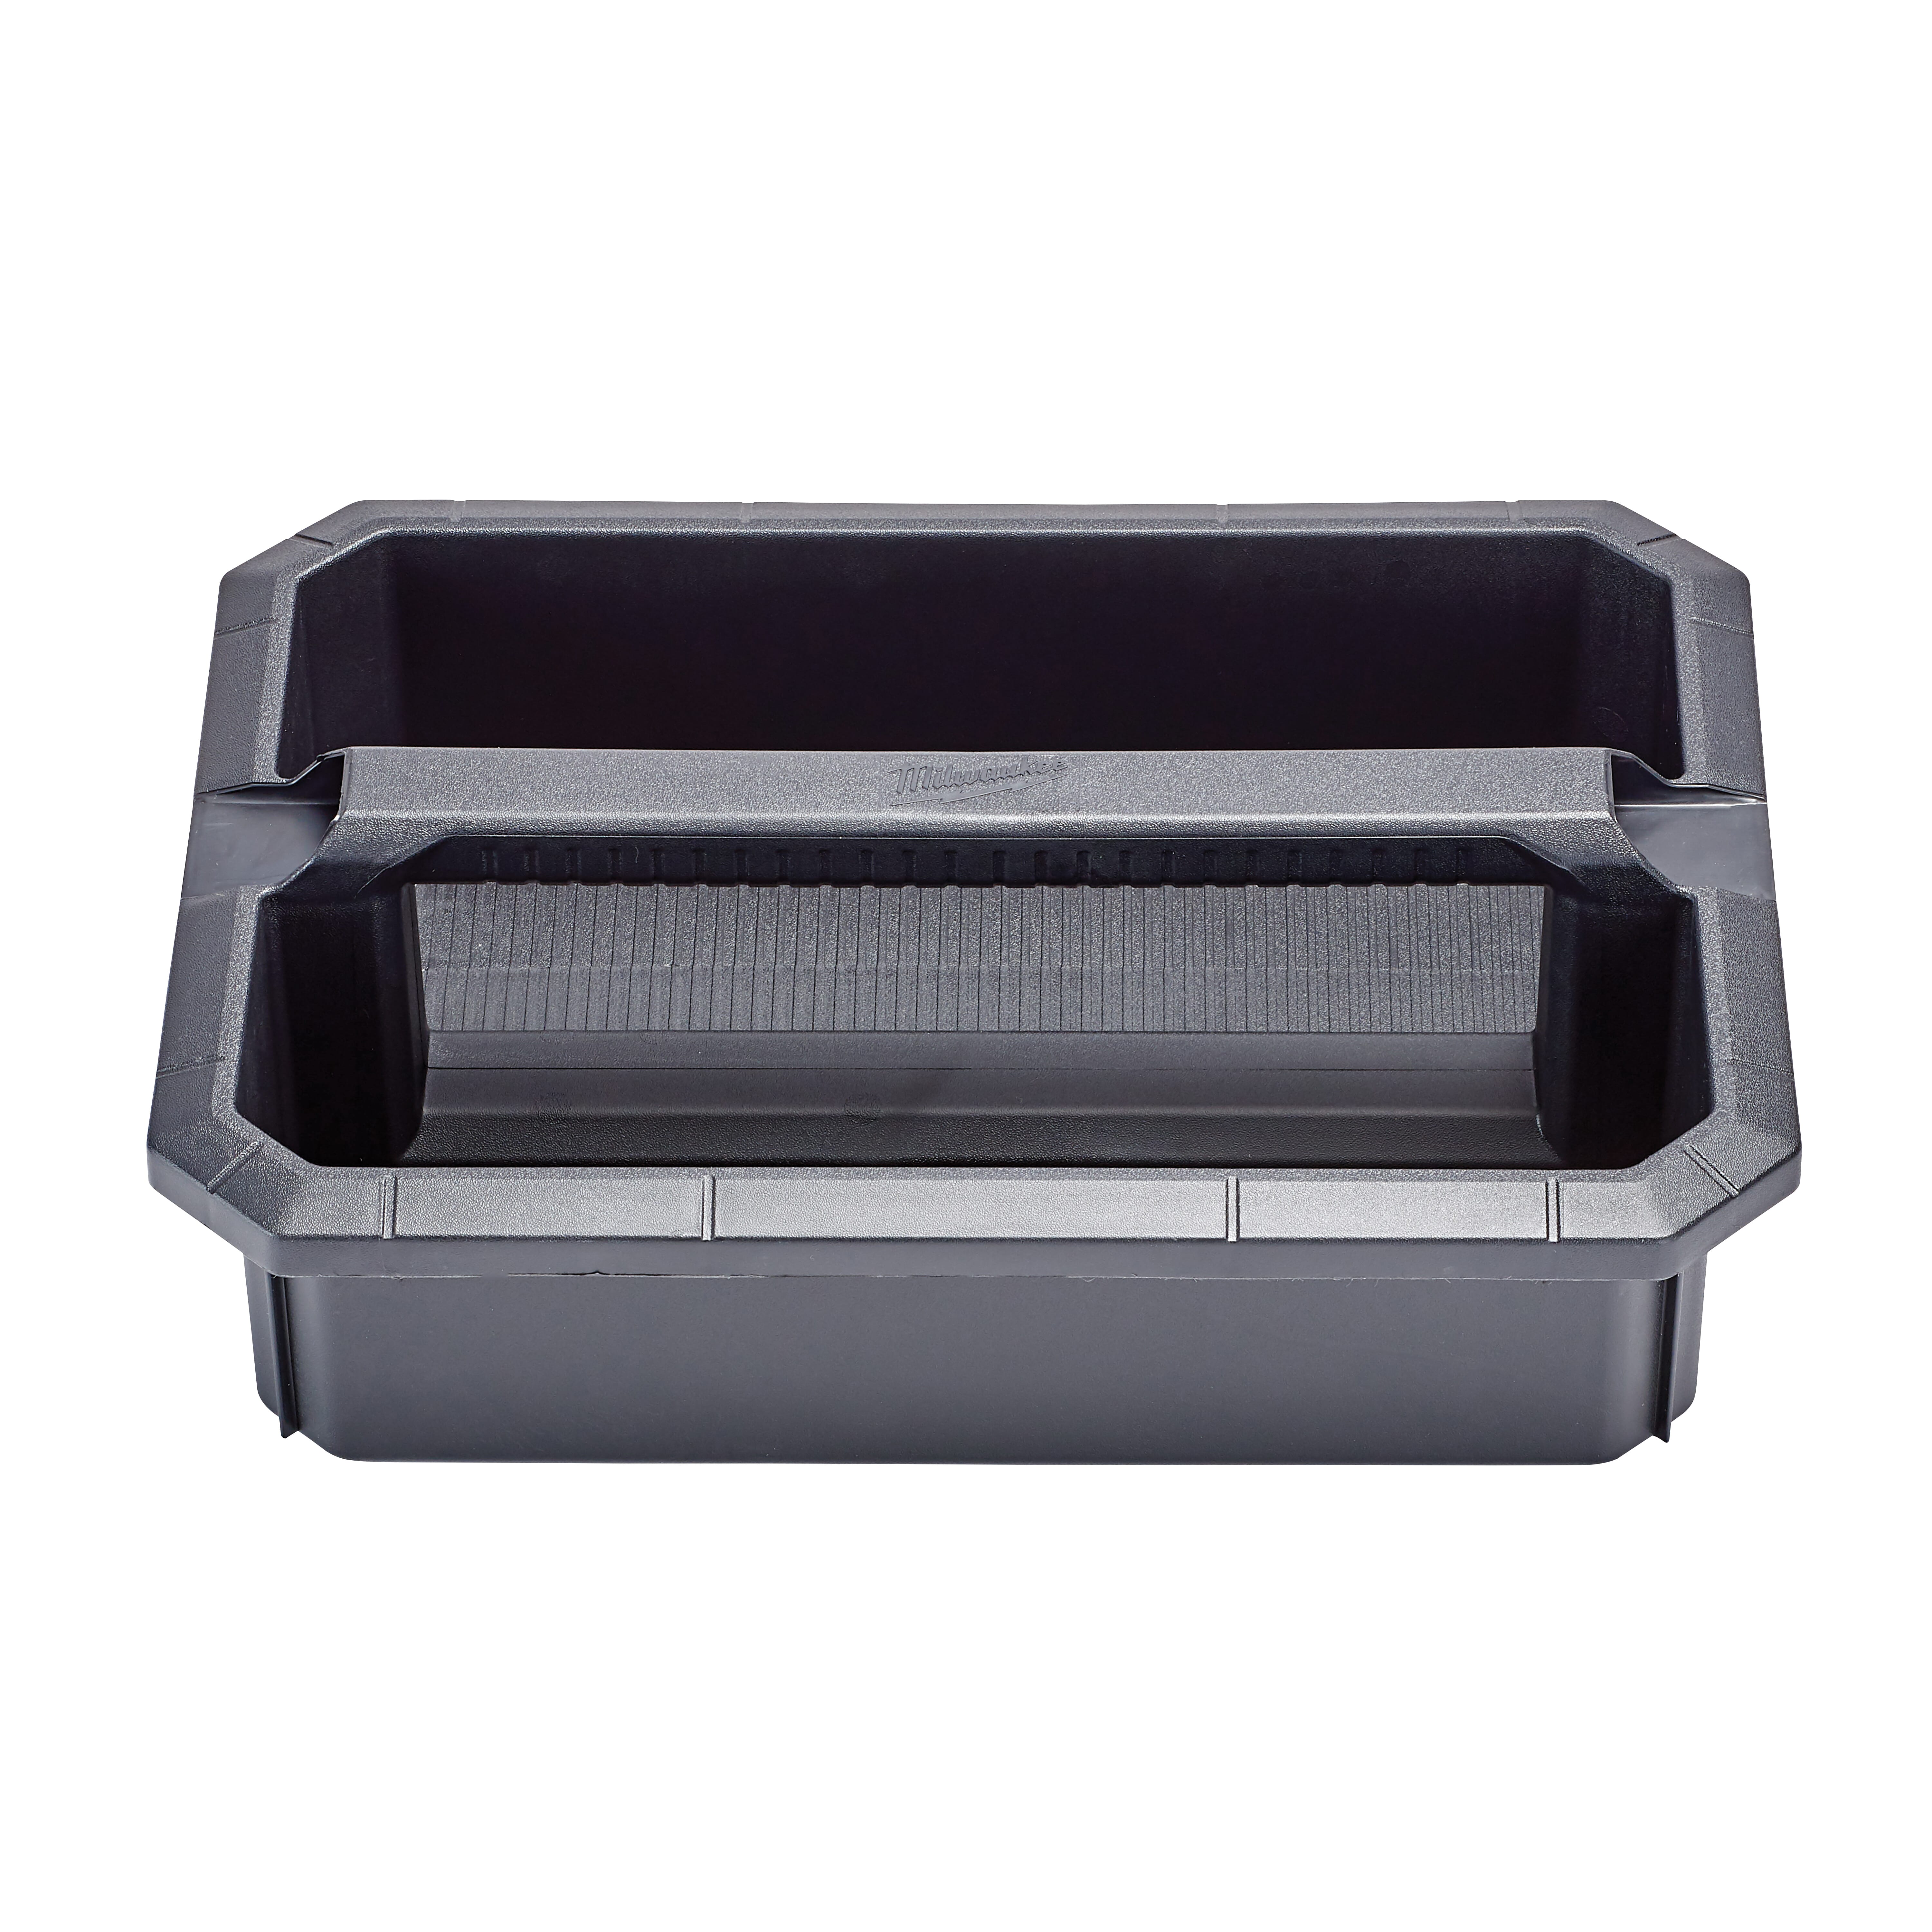 Milwaukee® 31-01-8400 Storage Tray, For Use With PACKOUT™ 48-22-8425/48-22-8426 Large Tool Box and 340 cu-in Insert Tray, Polymer, Black